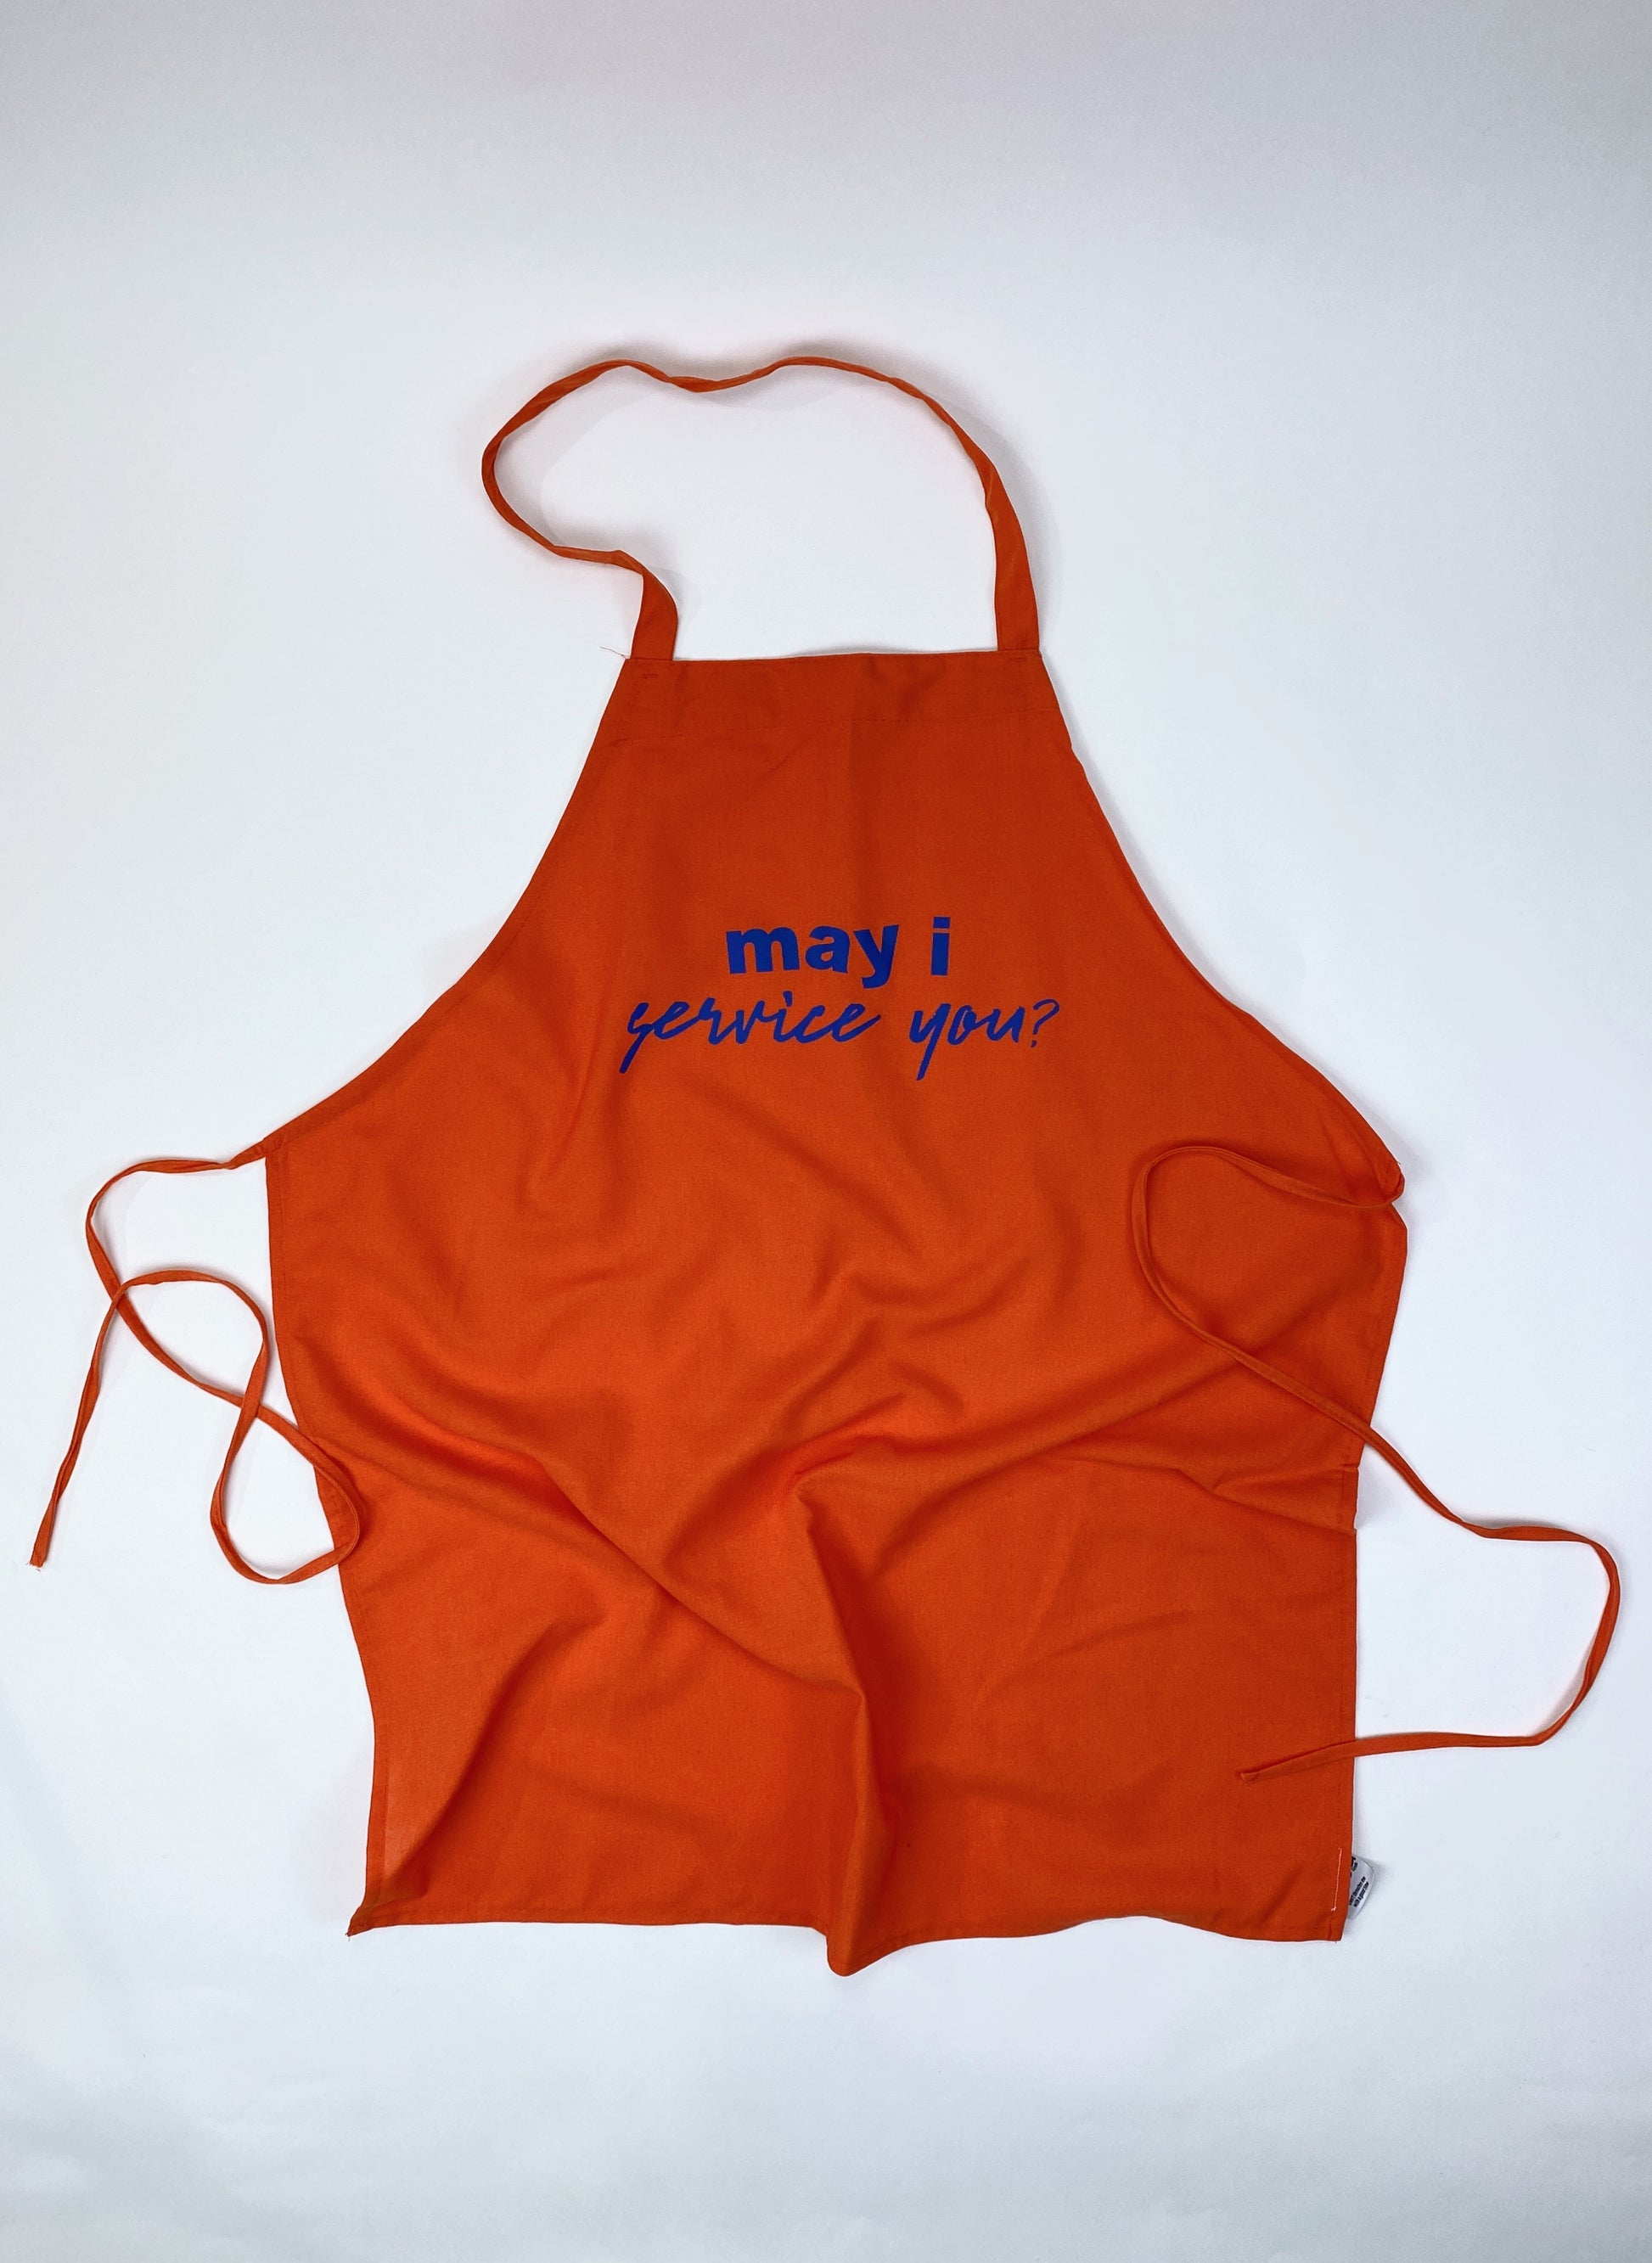 Empire Records May I Service You Apron - Totally Good Time